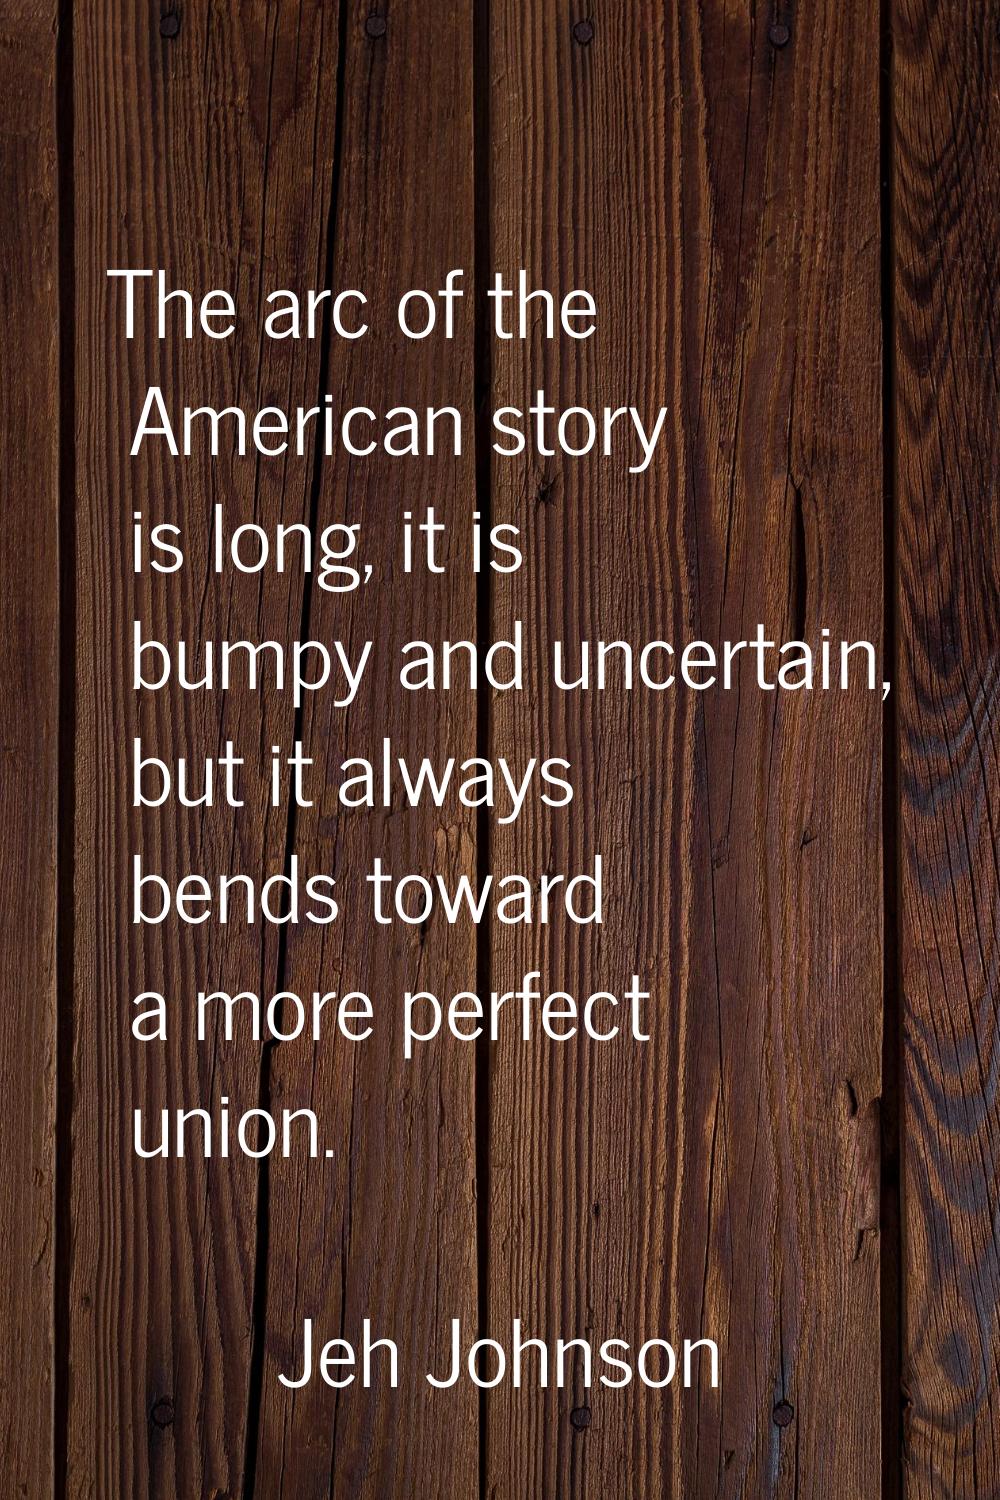 The arc of the American story is long, it is bumpy and uncertain, but it always bends toward a more